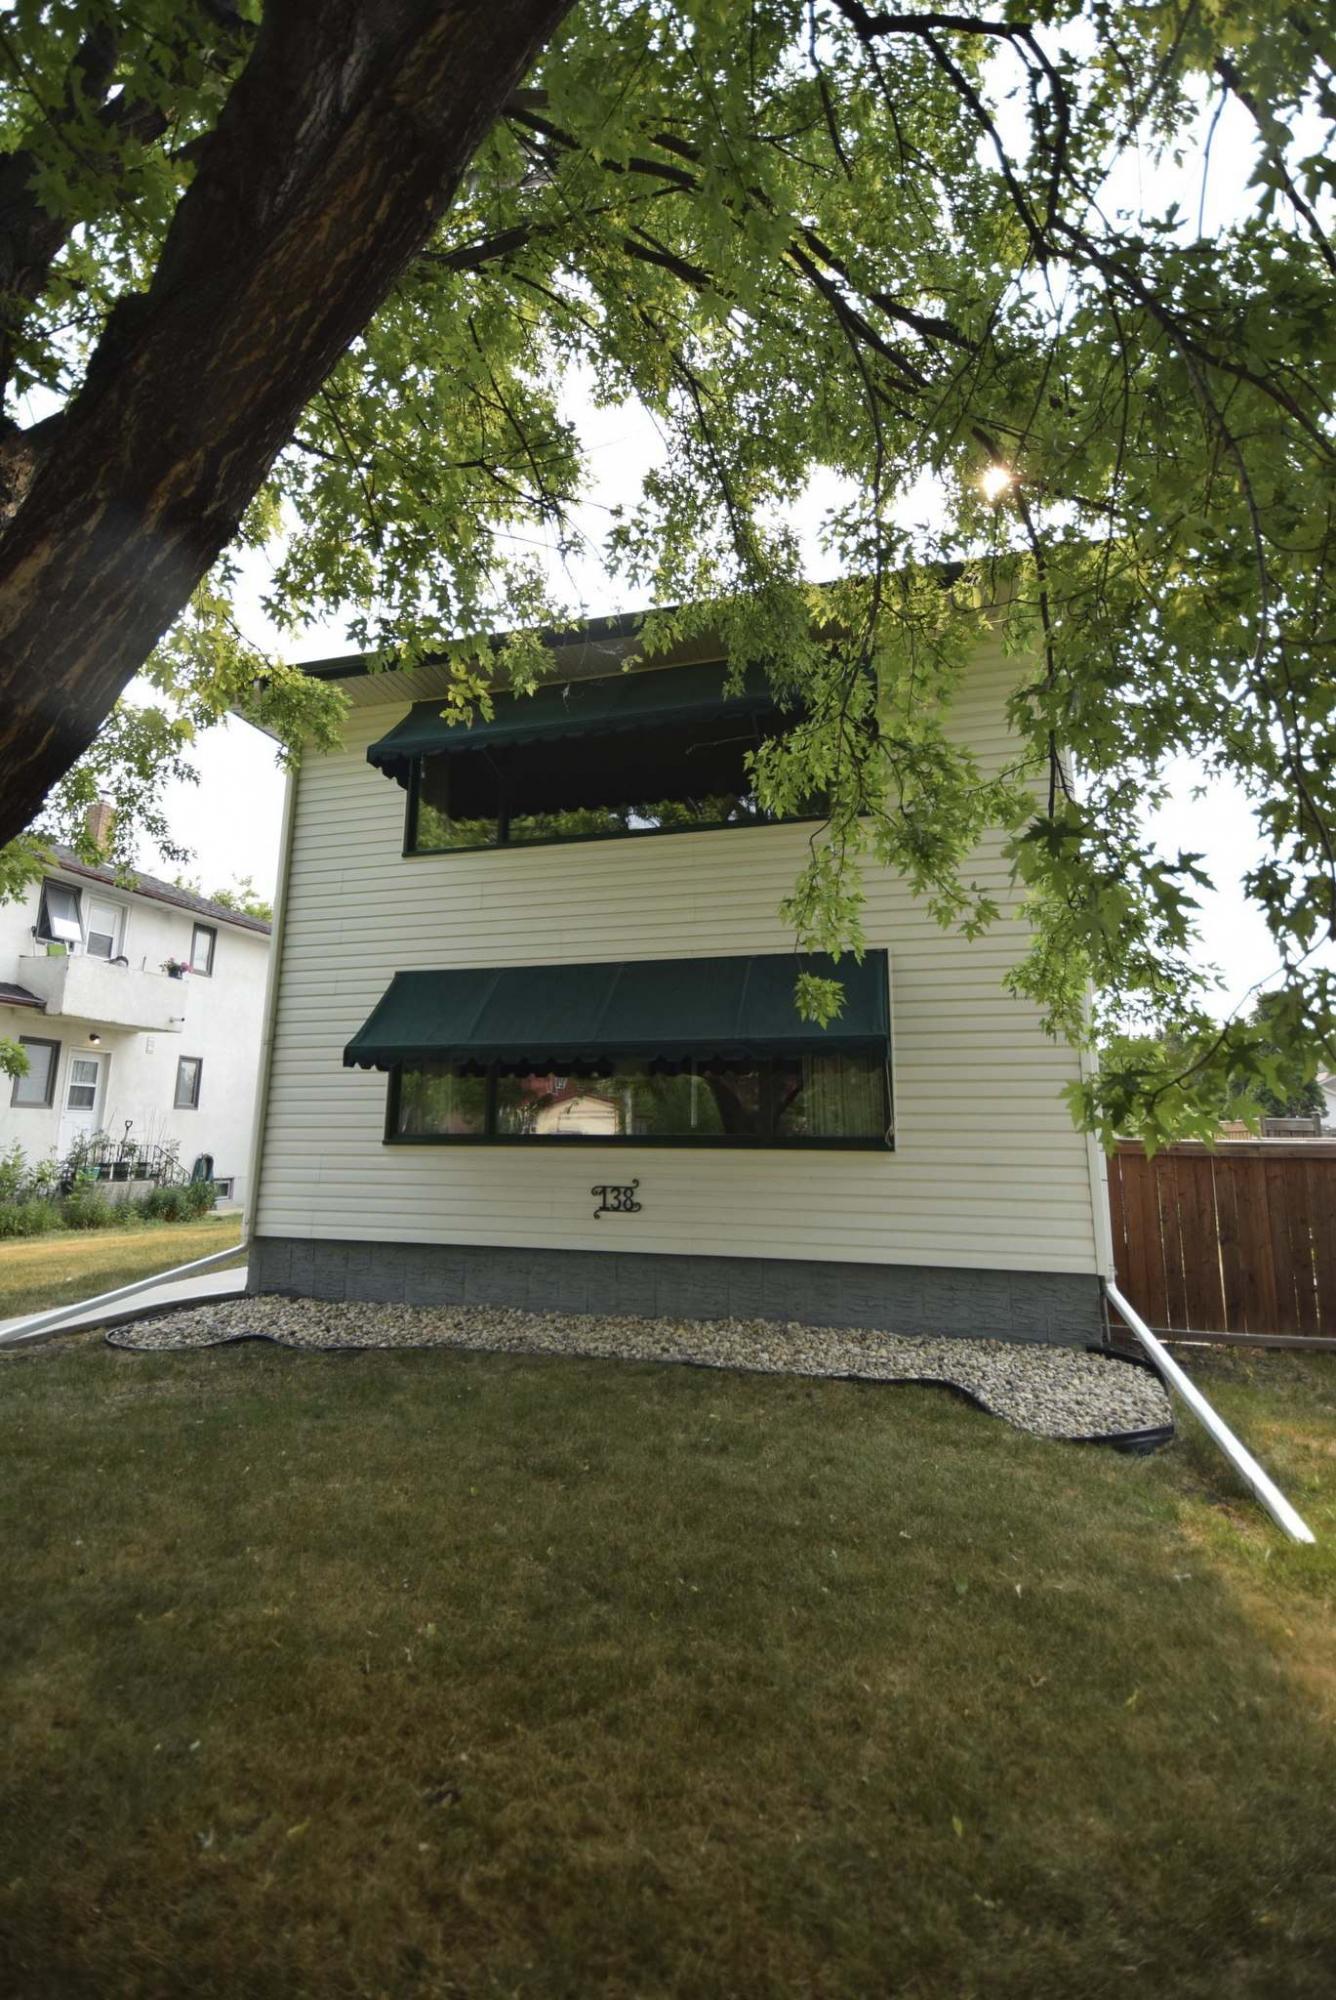 <p>Photos by Todd Lewys / Winnipeg Free Press</p><p>Offering 1,846 sq. ft. of total space, this updated two-storey home is a dual threat that could serve as a duplex or single-family home. </p>